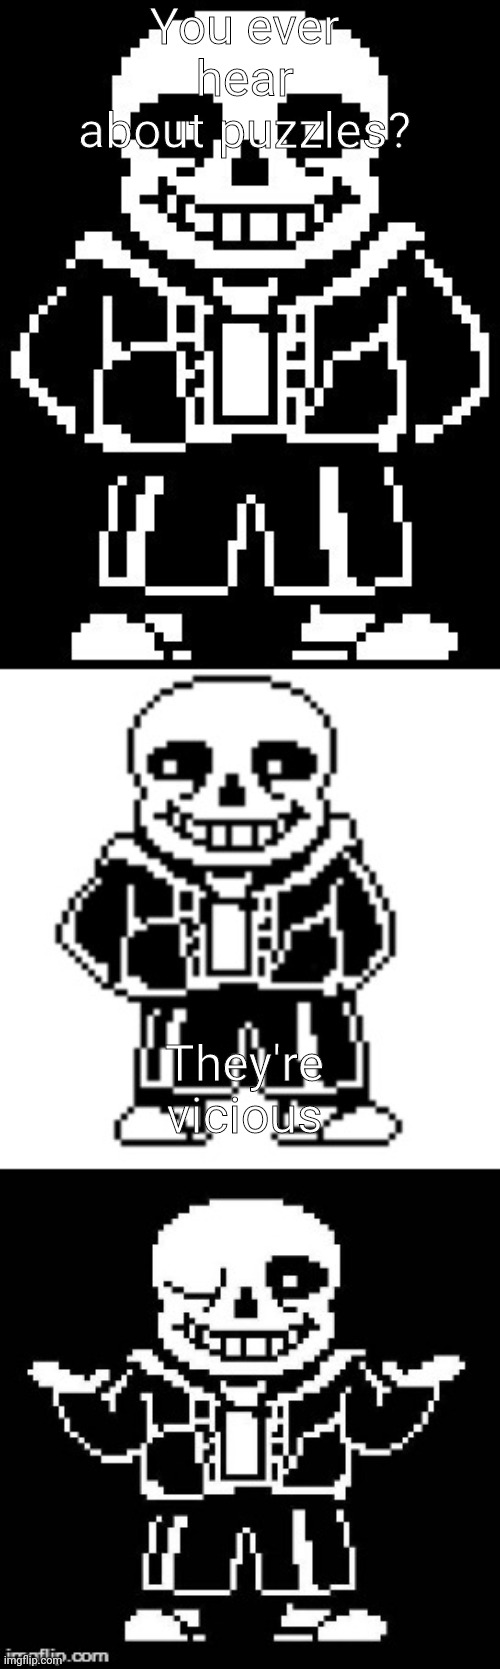 pun master sans  | You ever hear about puzzles? They're vicious | image tagged in pun master sans | made w/ Imgflip meme maker